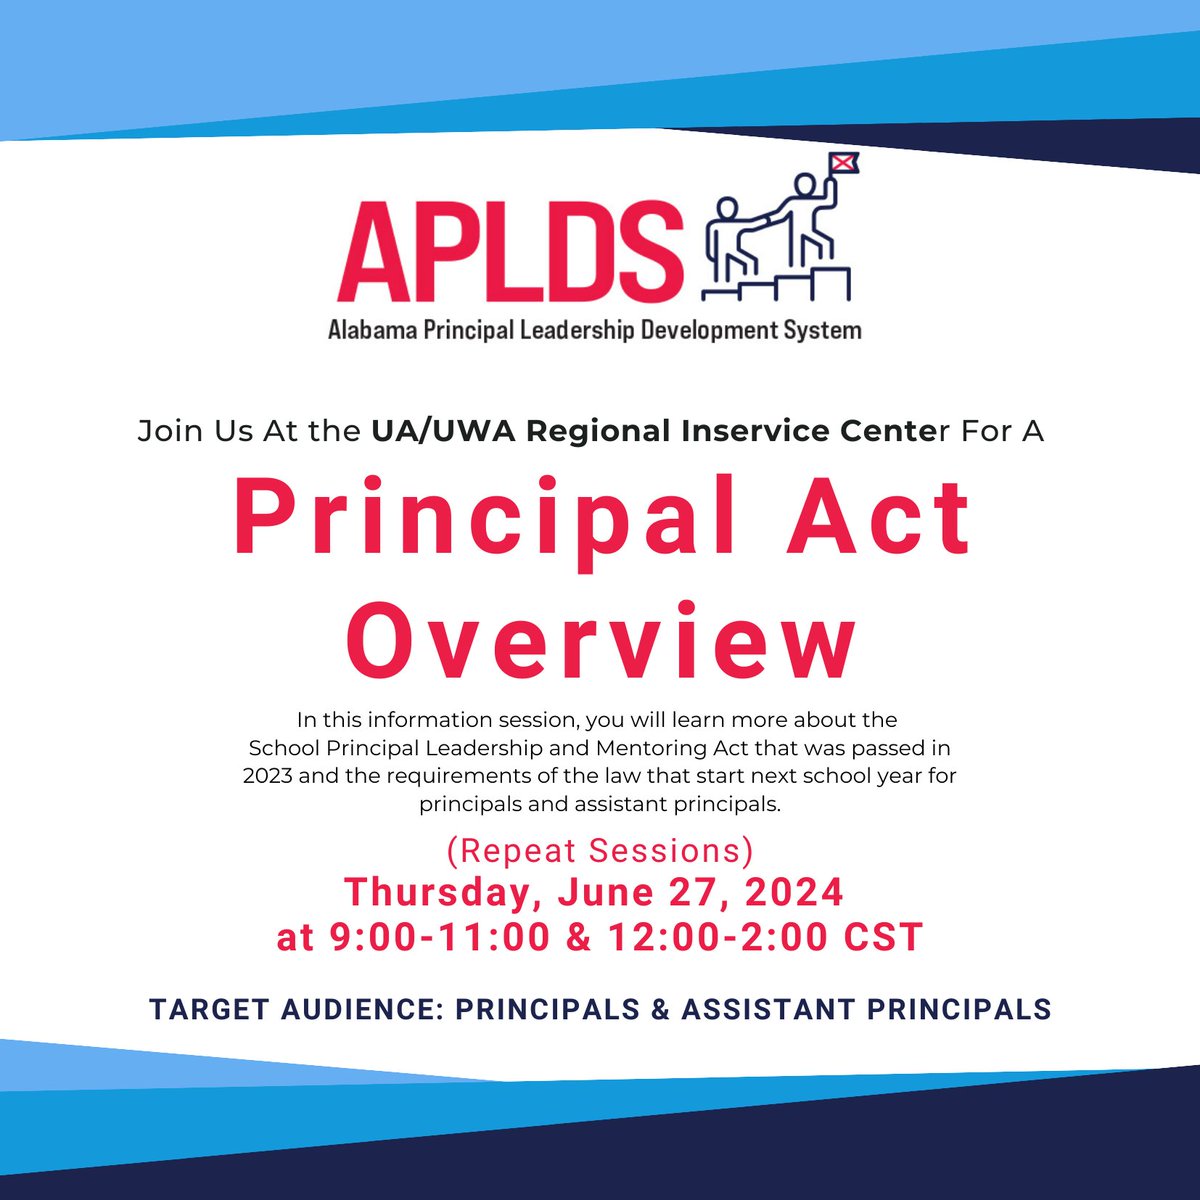 If you missed the @ALSchoolLeaders overview session for Region 4, we have another opportunity for you! Join @ShepherdJonesA on June 27 for either the morning or afternoon session. Register via PowerSchool PL #500416 or #500417.